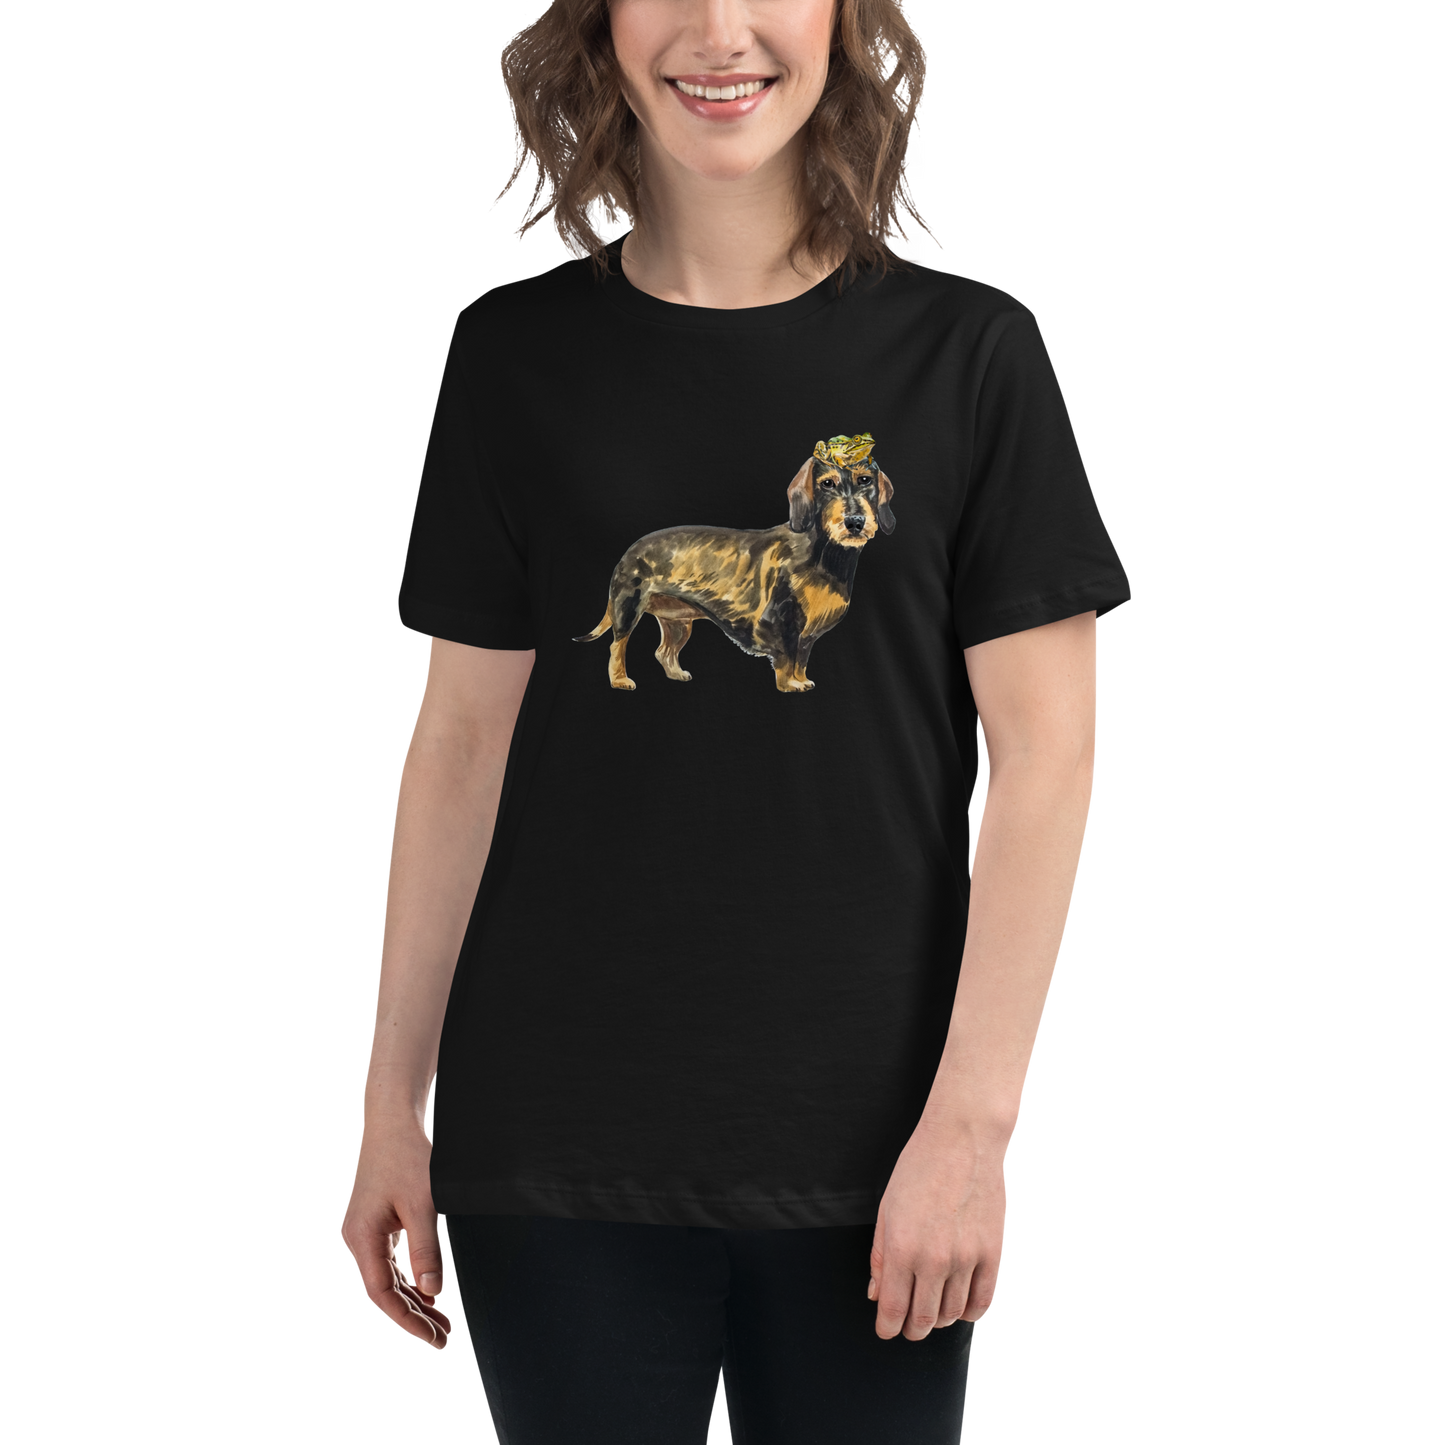 Smiling Woman Wearing a Women's relaxed black Dachshund t-shirt featuring a charming Frog on a Dachshund's Head graphic on the chest - Women's Cute Graphic Dachshund Tees - Boozy Fox